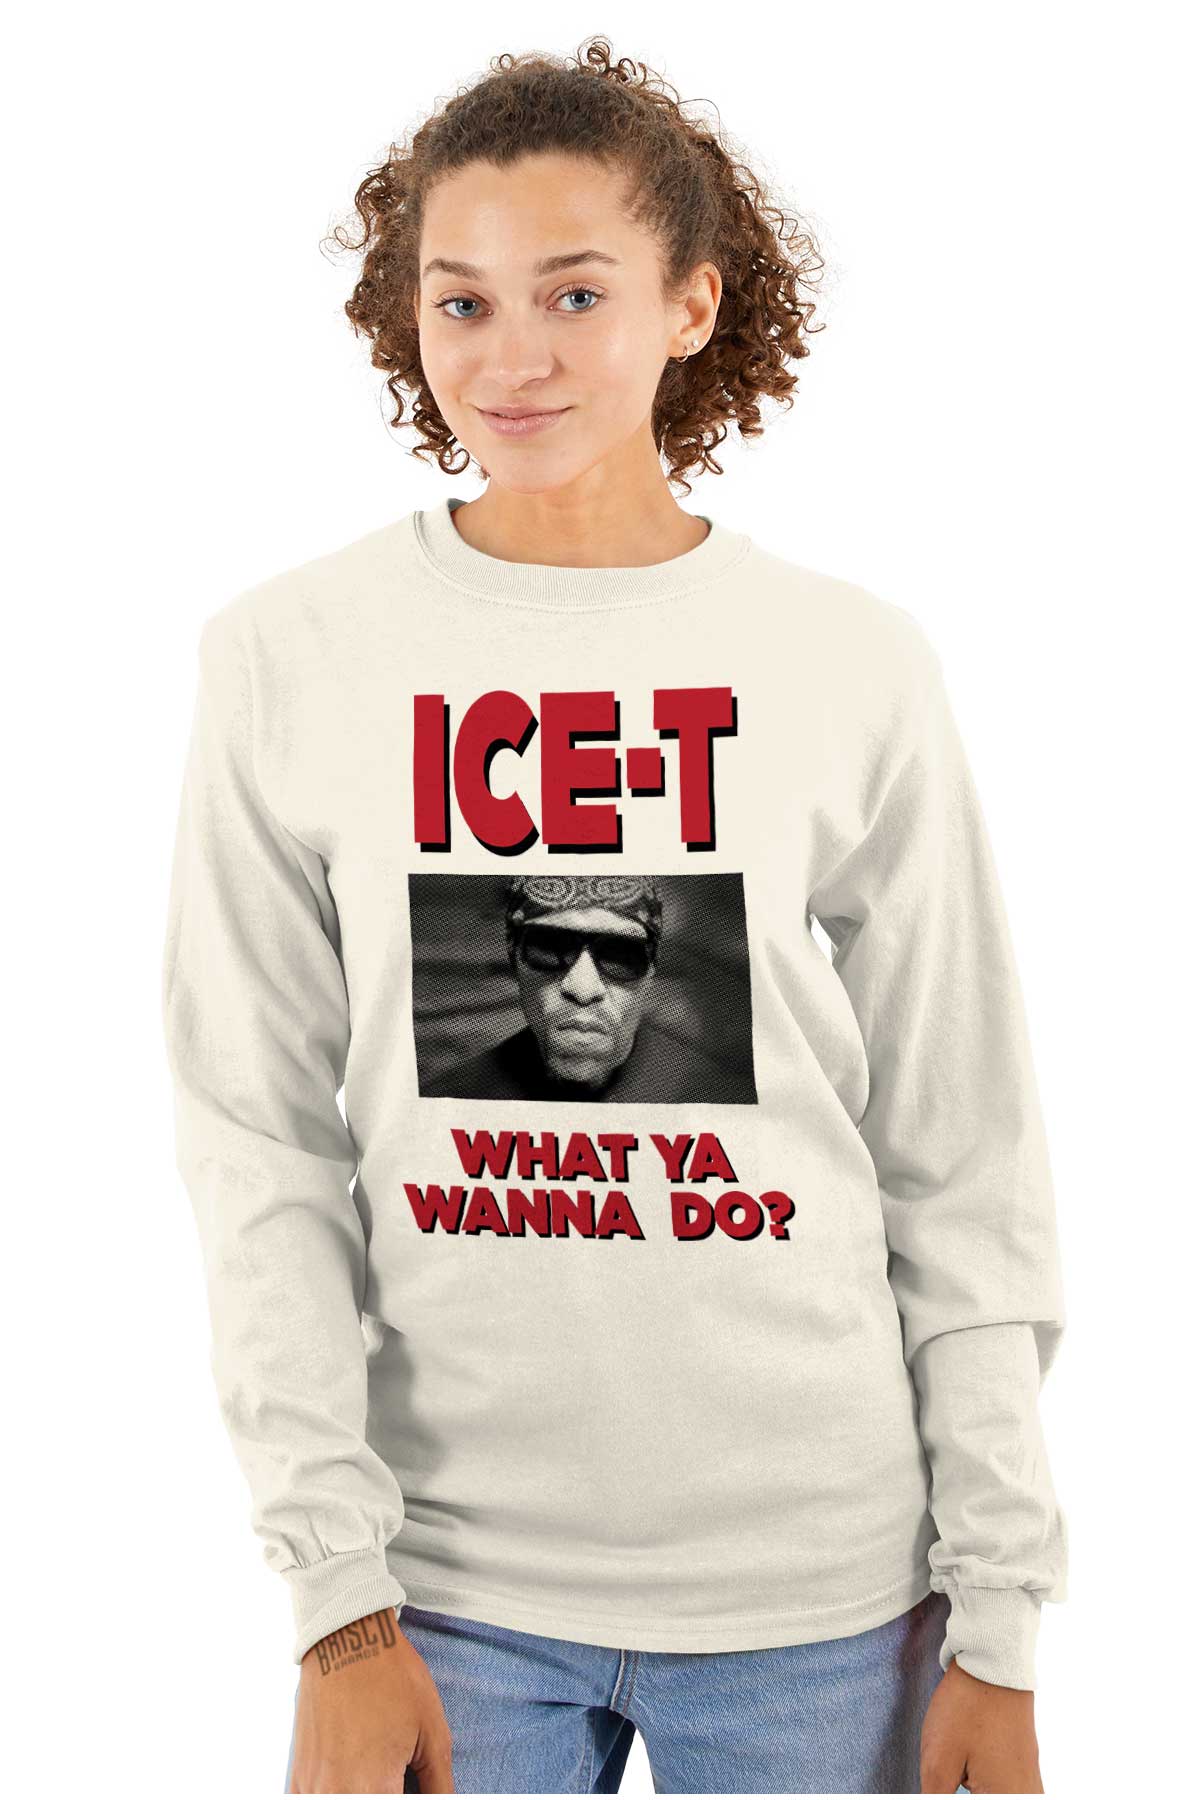 This shirt depicts Ice-T and embodies hip-hop culture and empowers you to make a statement with confidence and style.